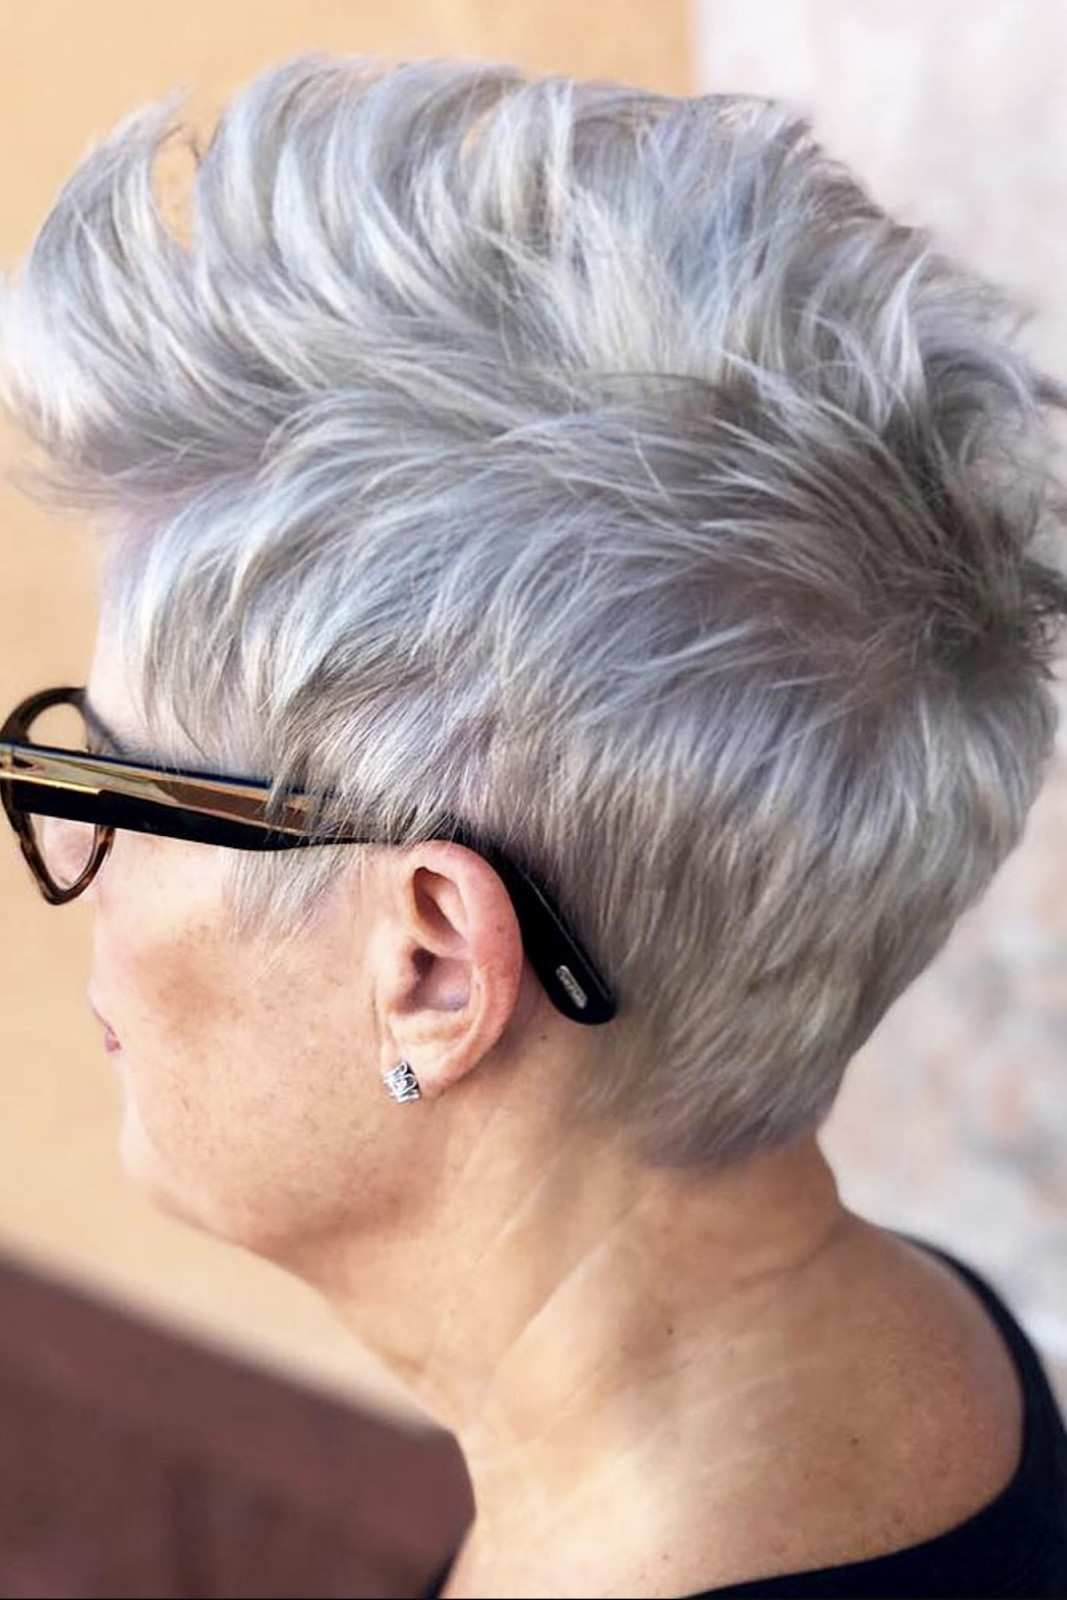 Short Haircuts For Older Women 2020
 2019 2020 Short Hairstyles for Women Over 50 That Are